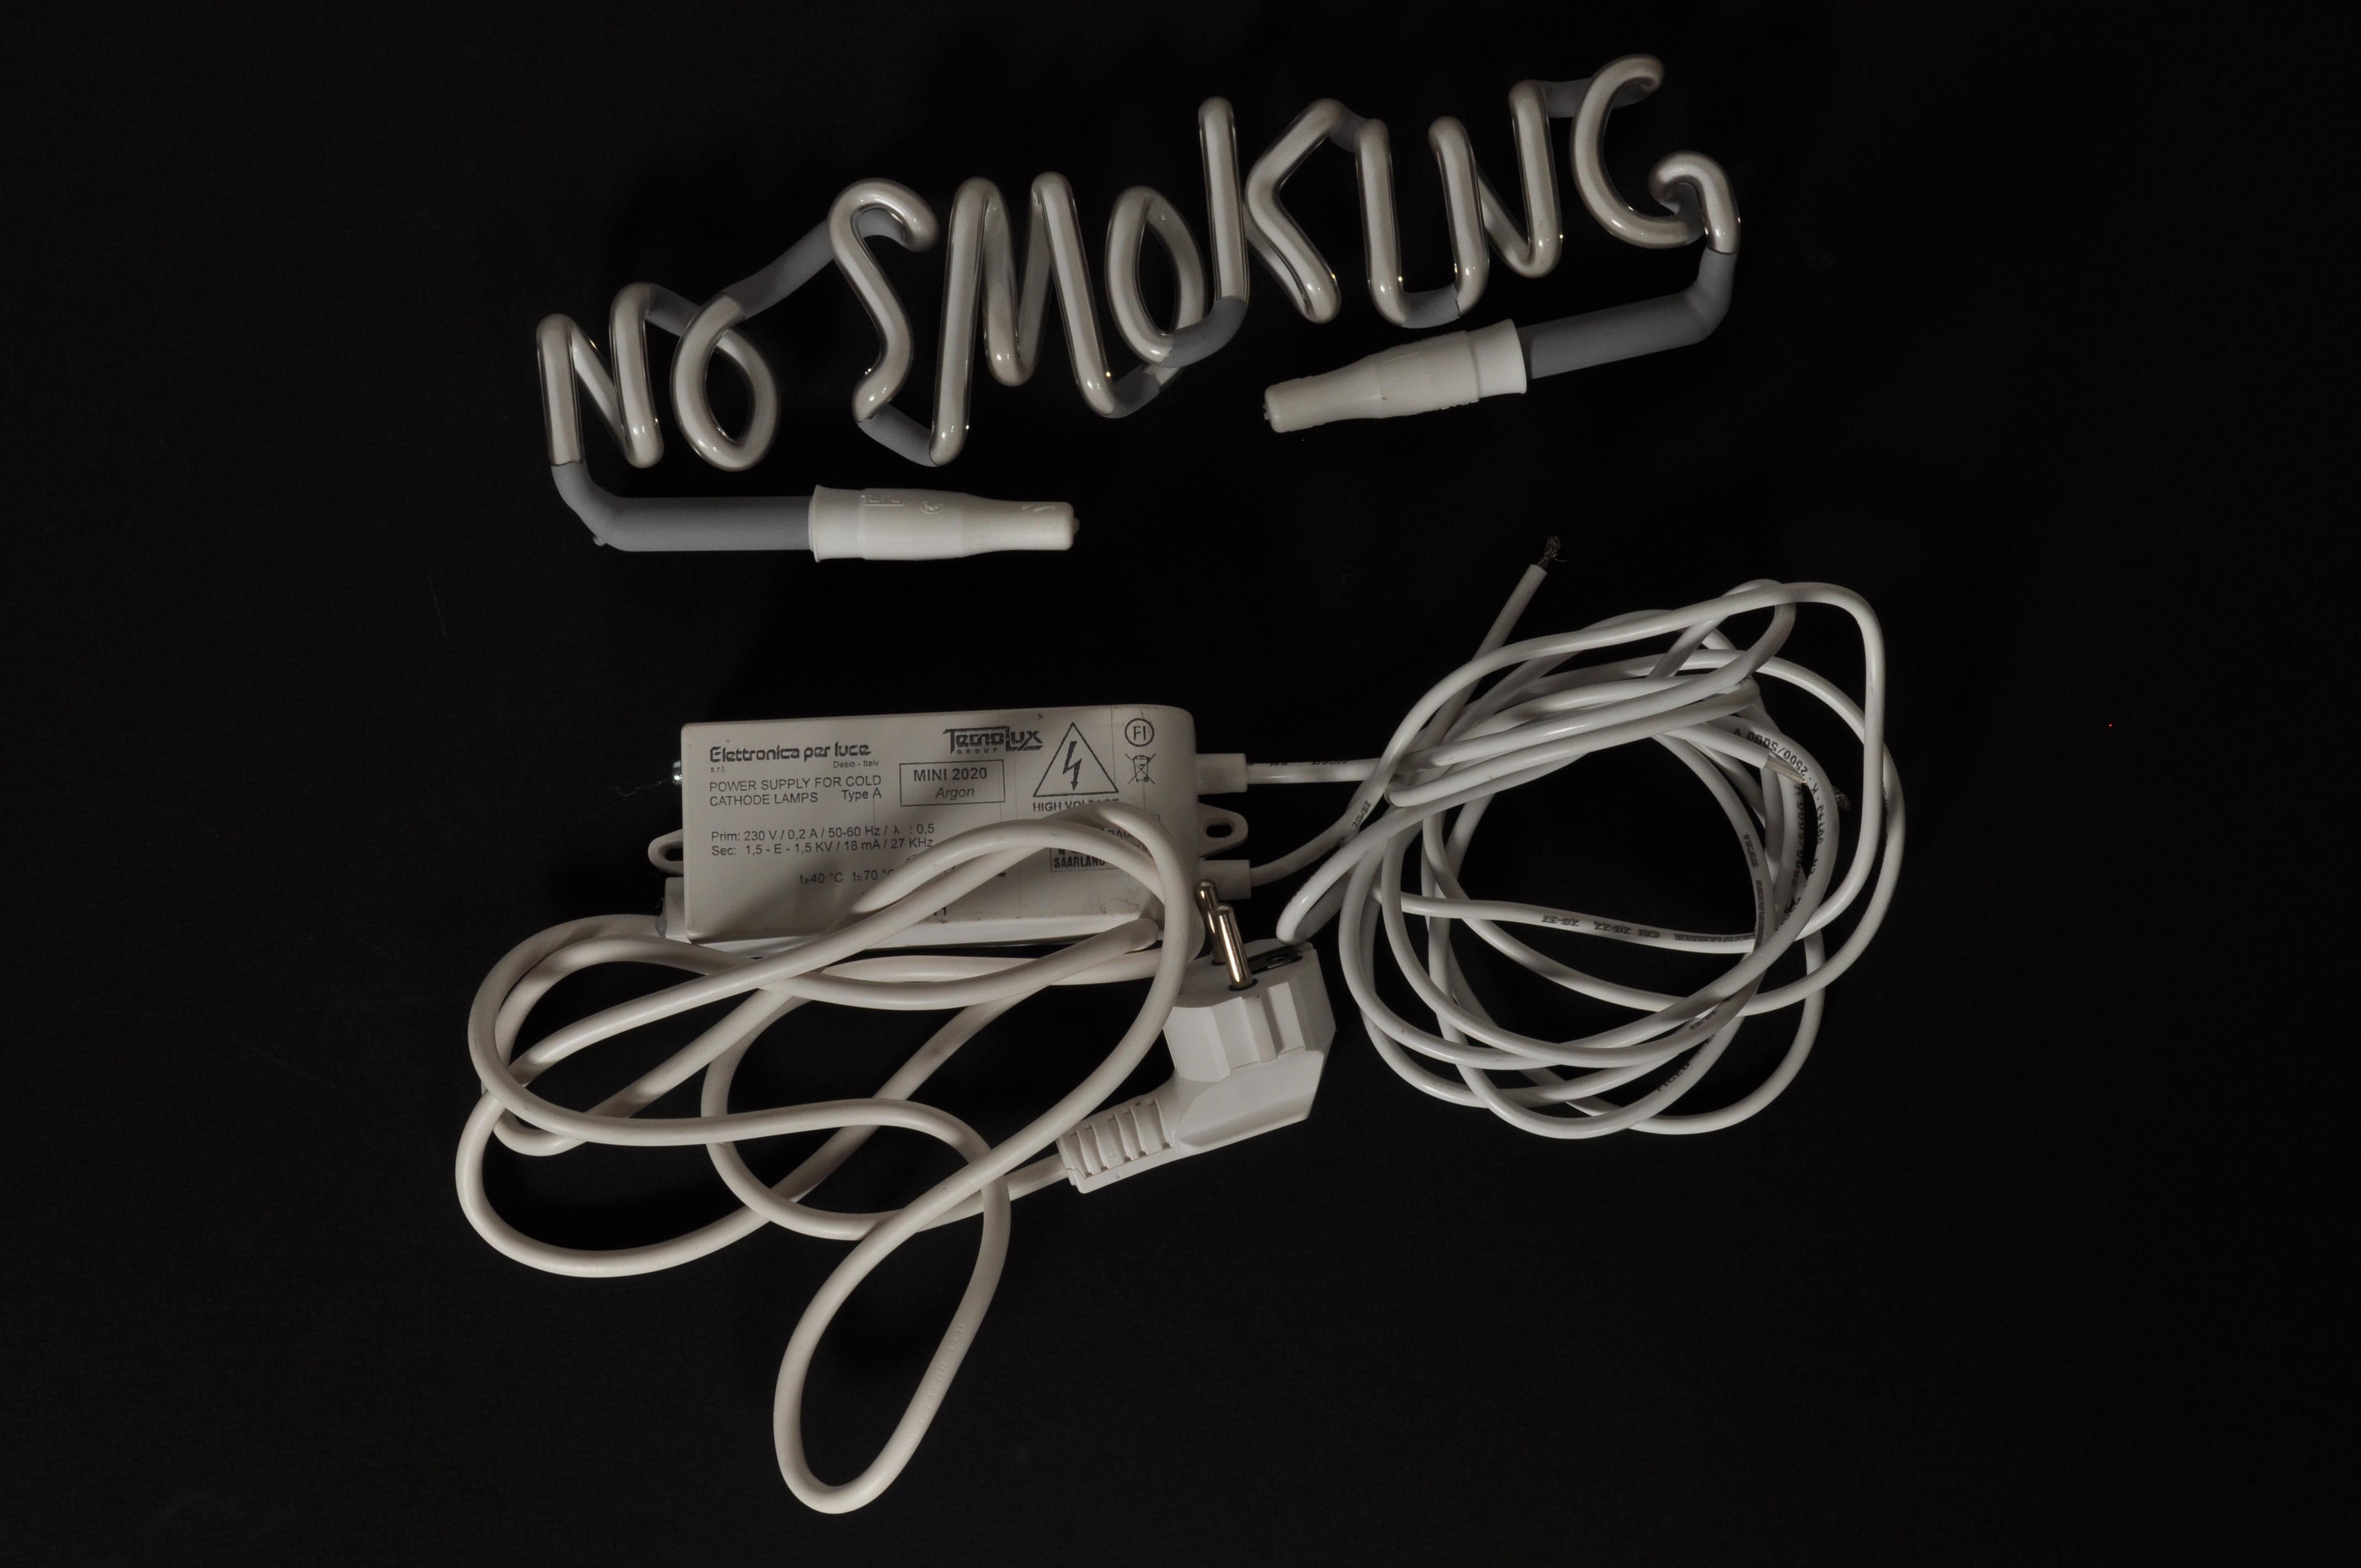 Adel Abdessemed 
No Smoking, 2012 
Neon Sculpture 
Edition of 30 
7.3 x 26.6 x 0.8 cm (2.9 x 10.5 x 0.3 in) 
Signed and numbered on certificate
In mint conditions, as acquired from publisher

Conceptual artist Adel Abdessemed, like William Lamson